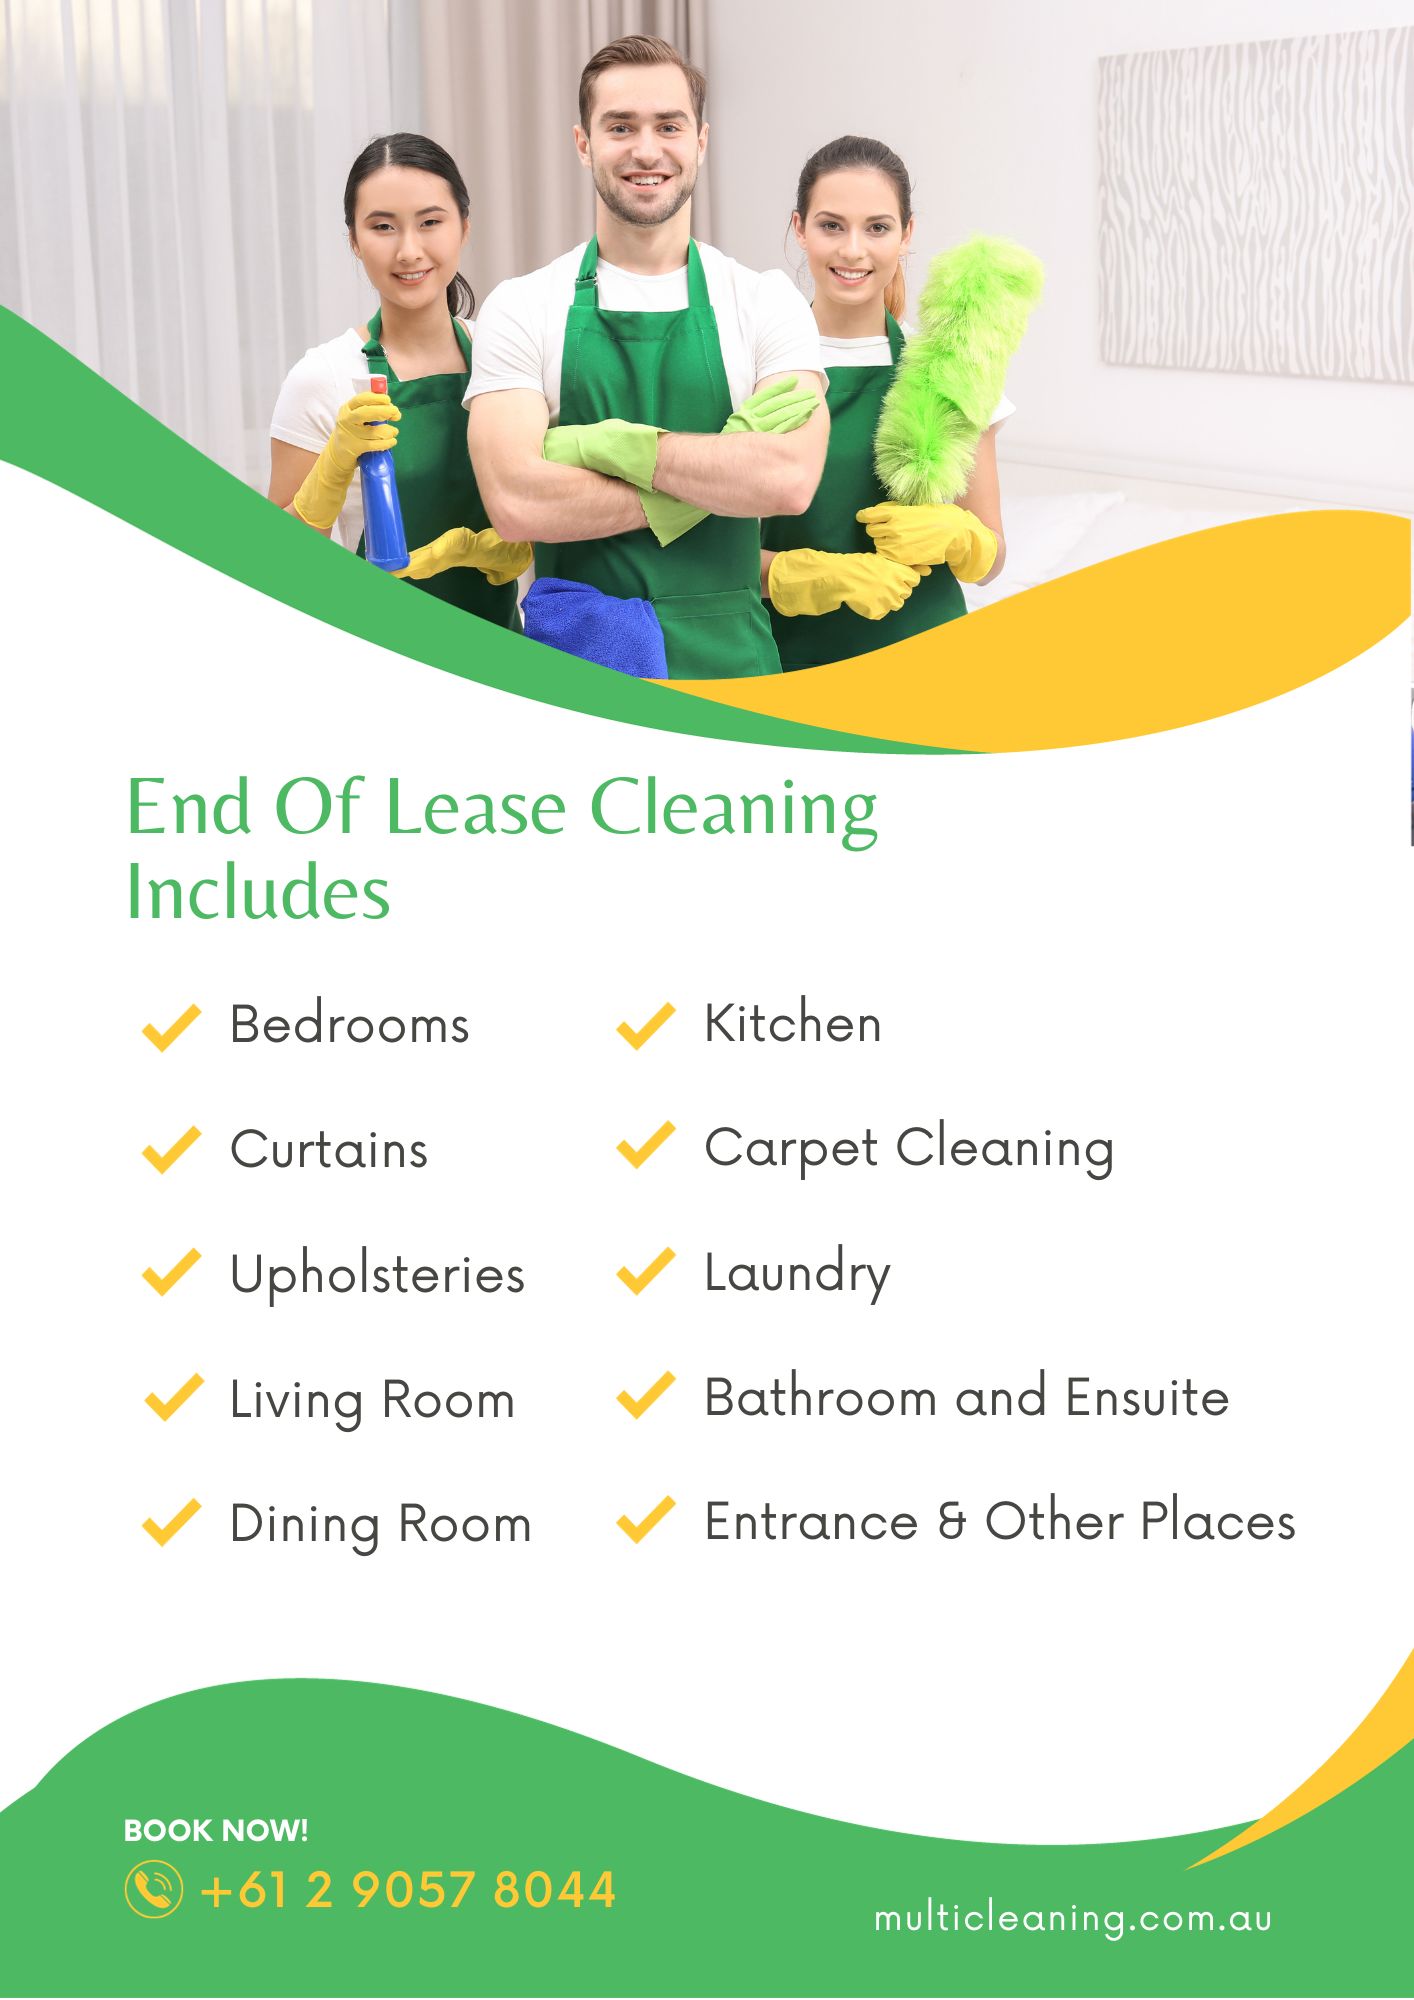 End of lease cleaning includes